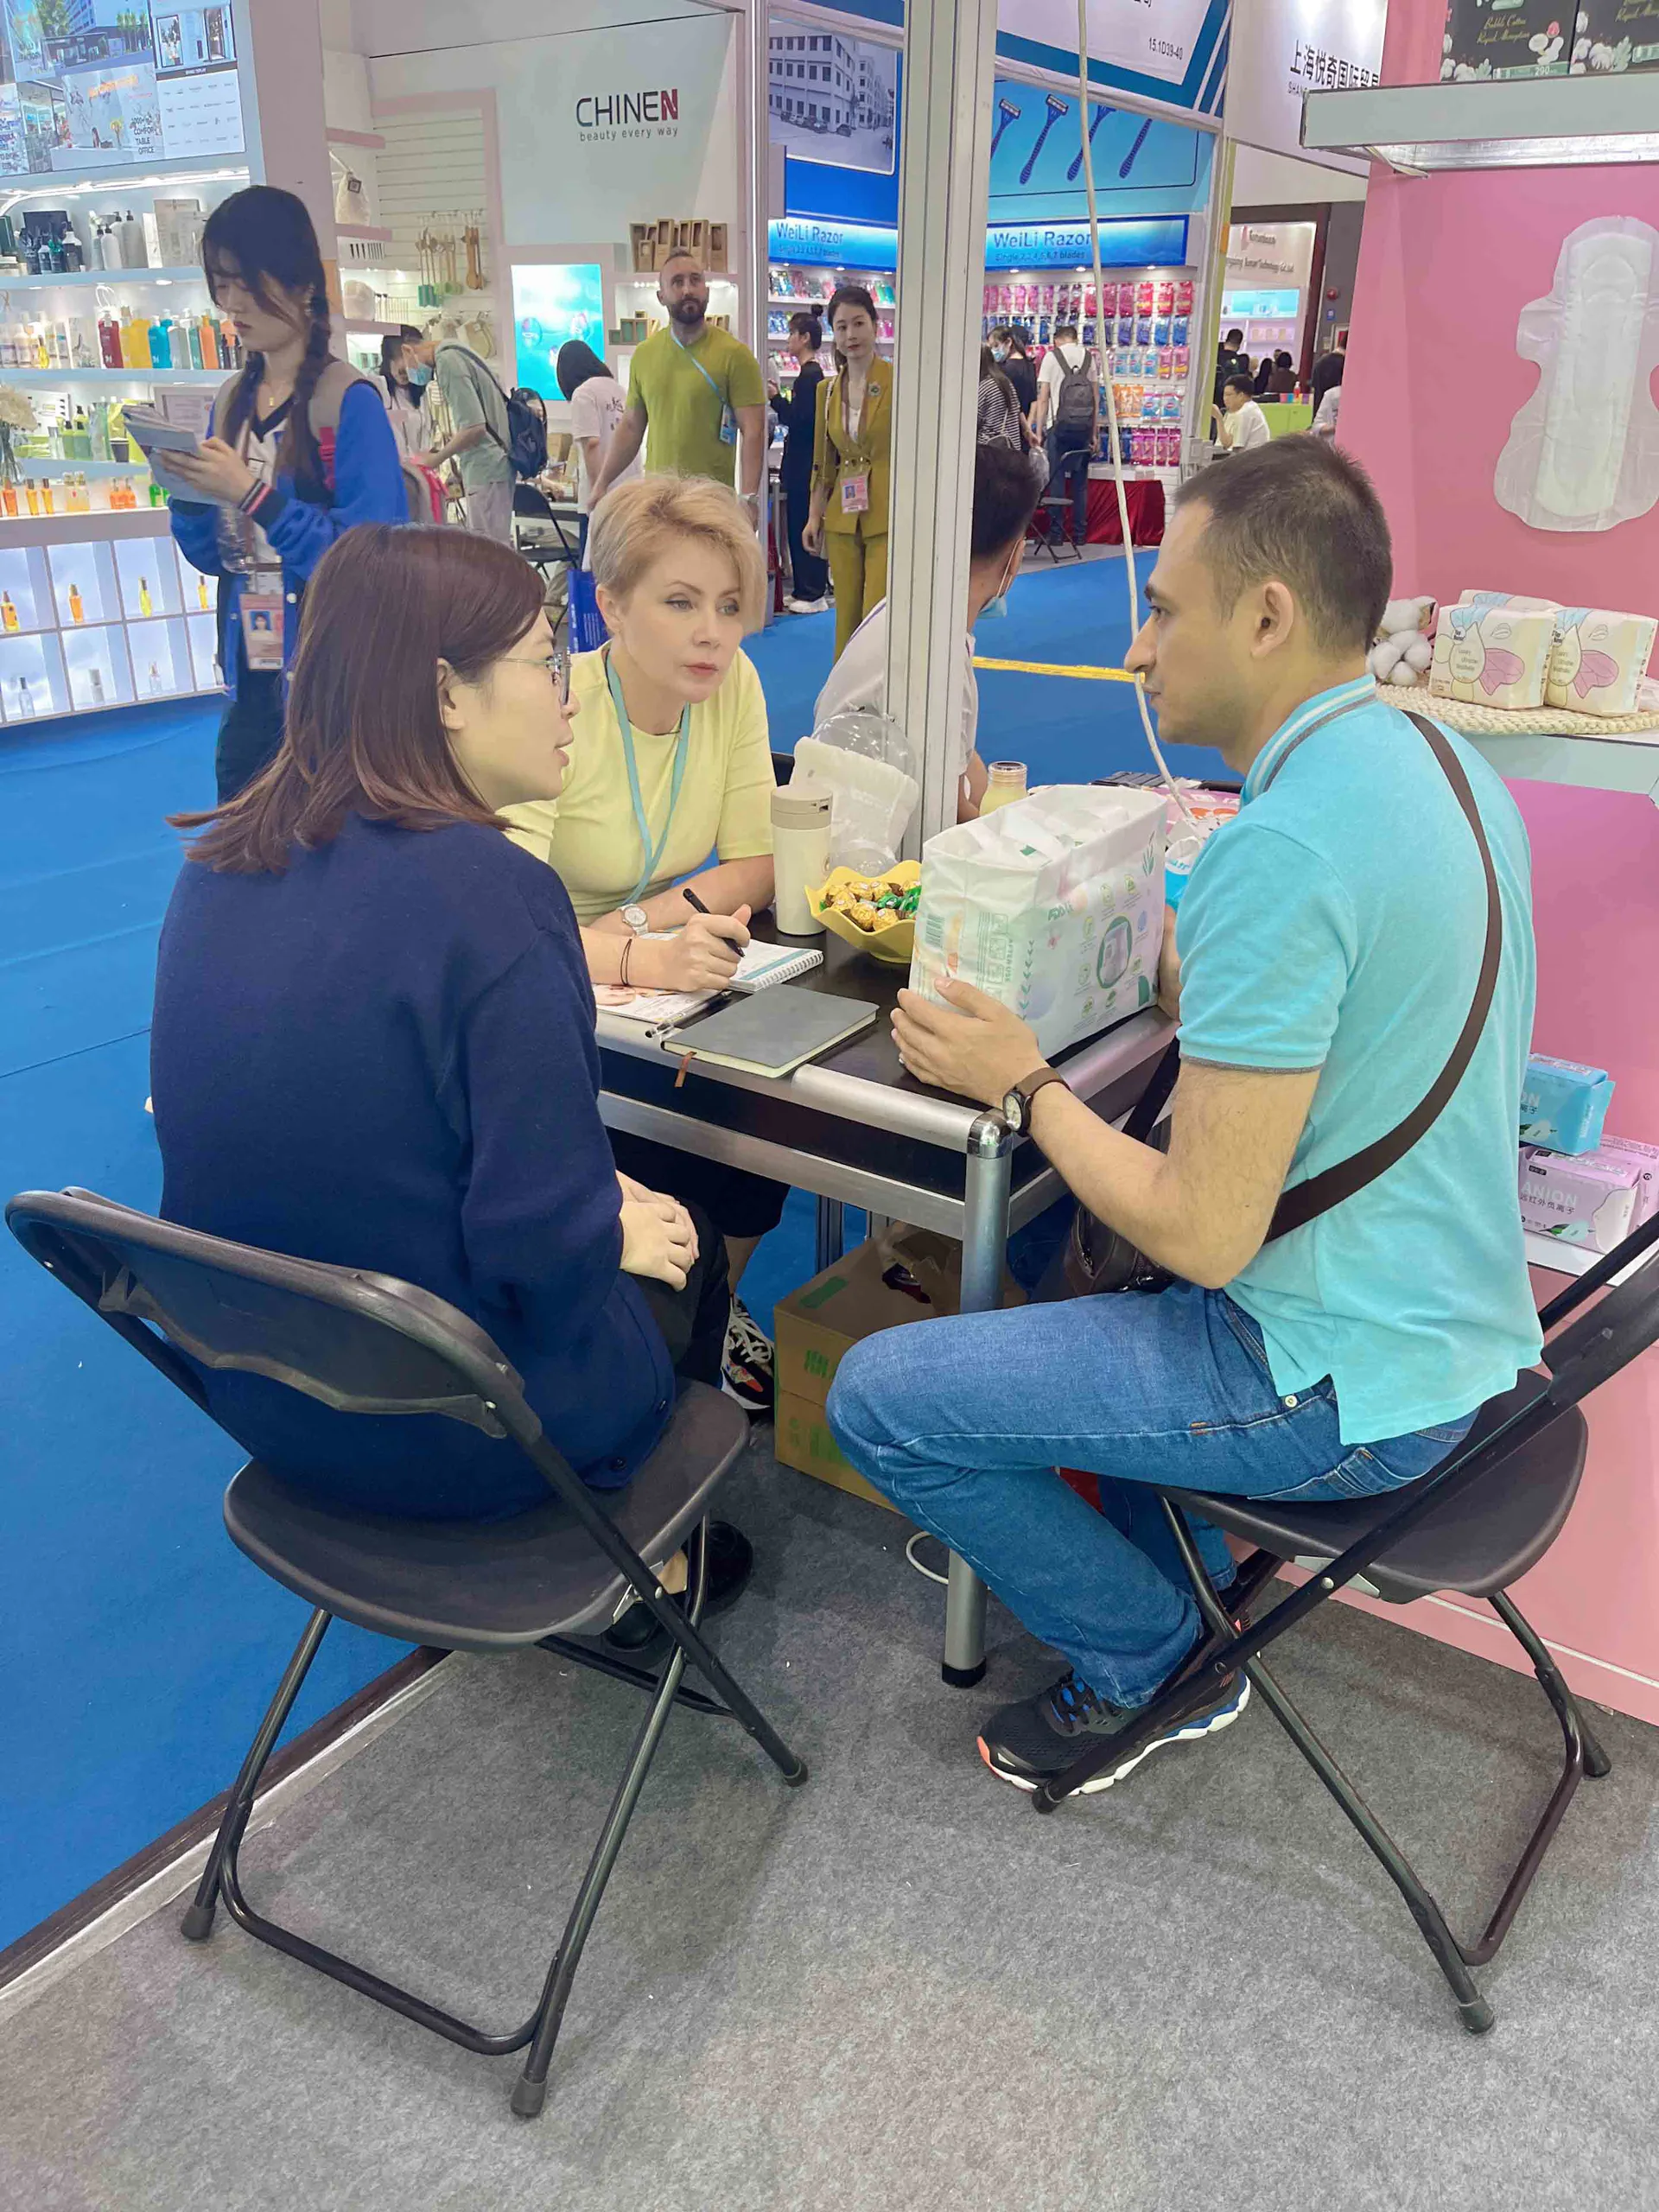 Welcome to Visit Our Baby Diapers at Canton Fair